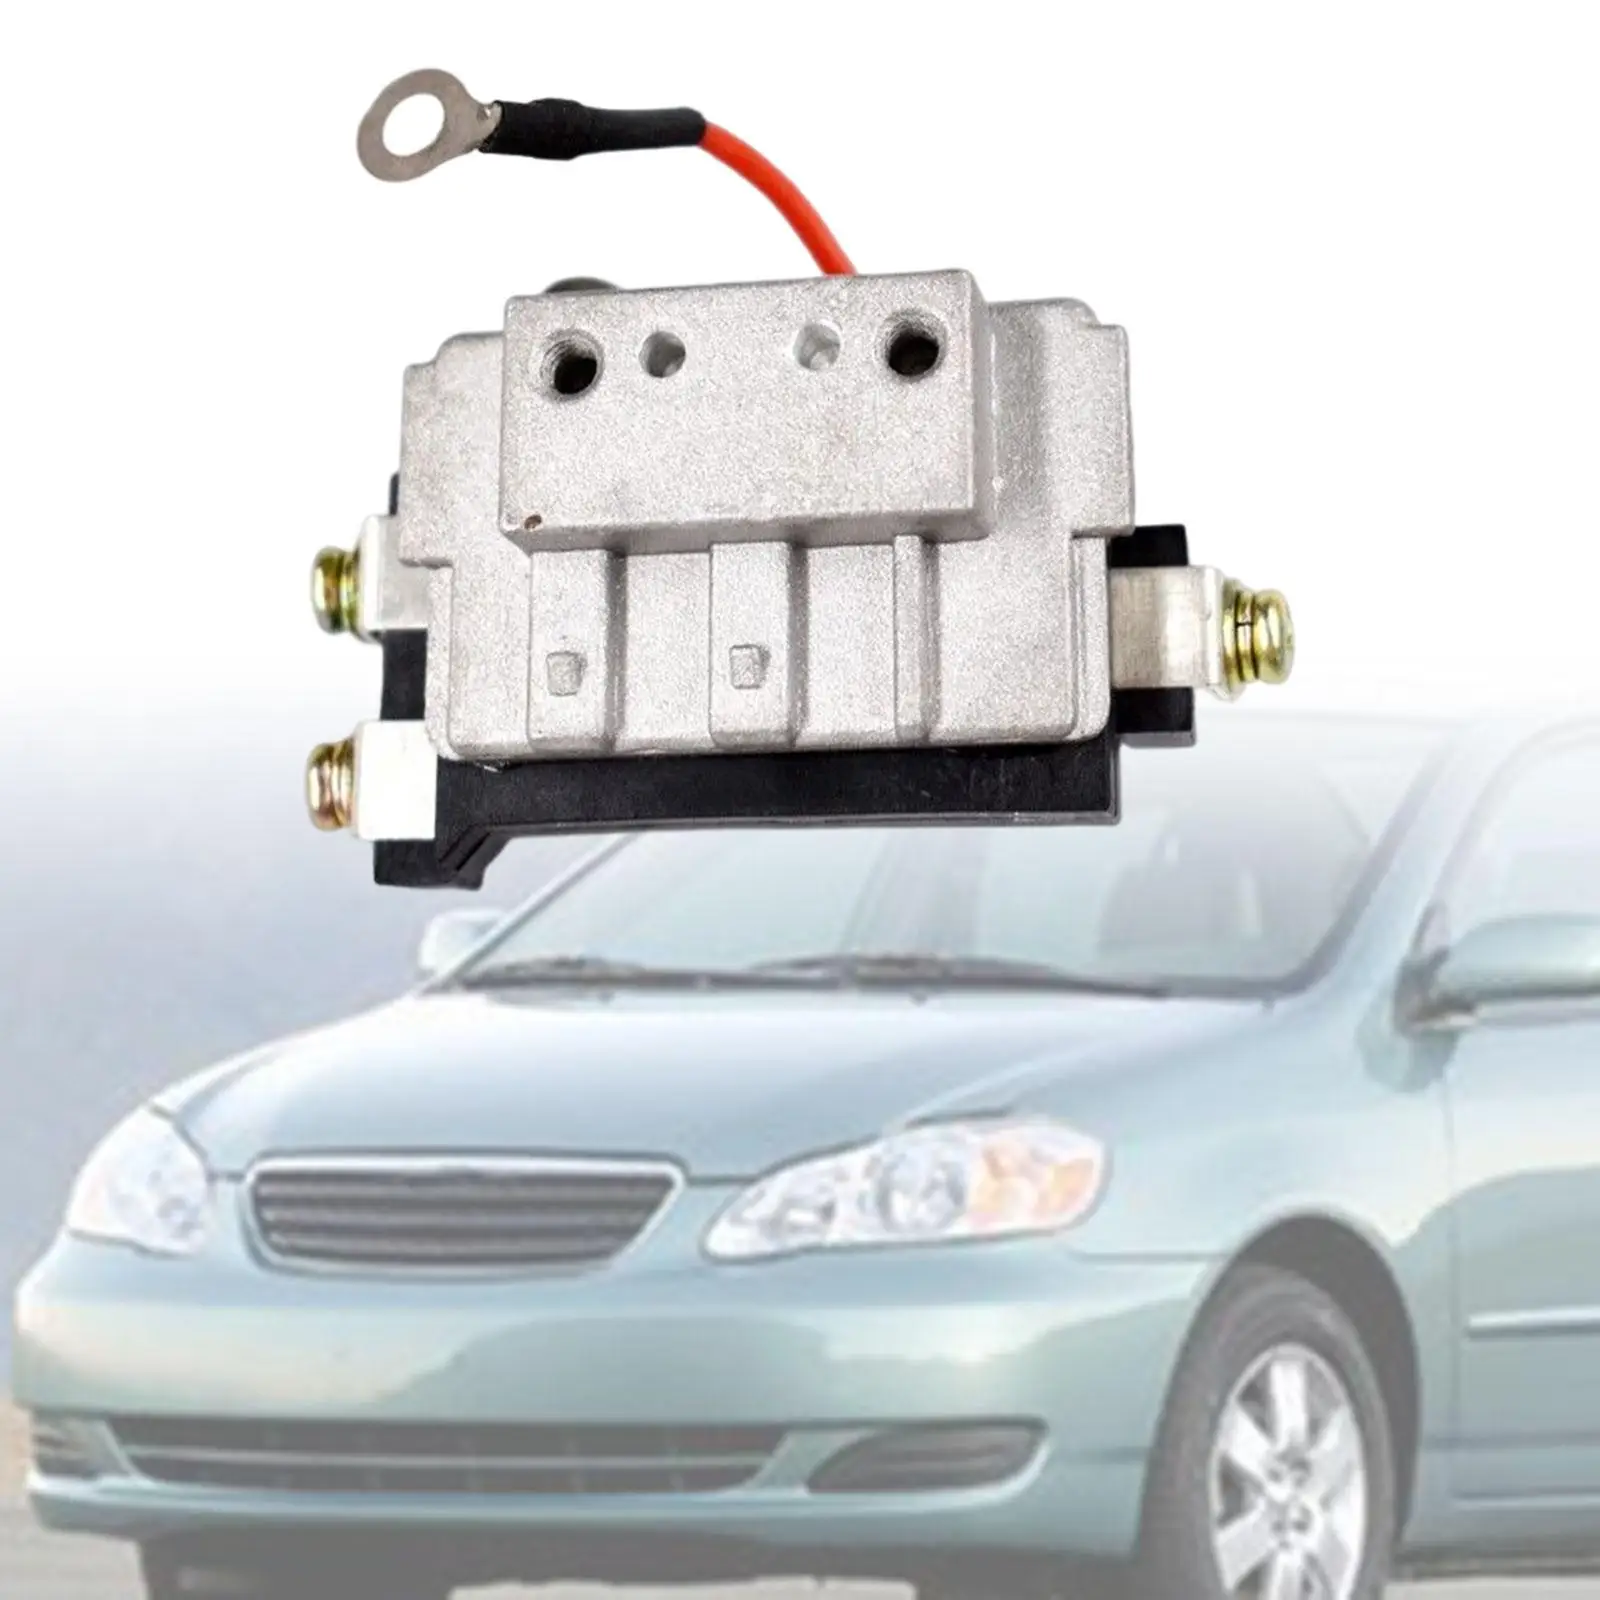 Ignition Module Replacement Easy to Install Durable for Toyota Corolla